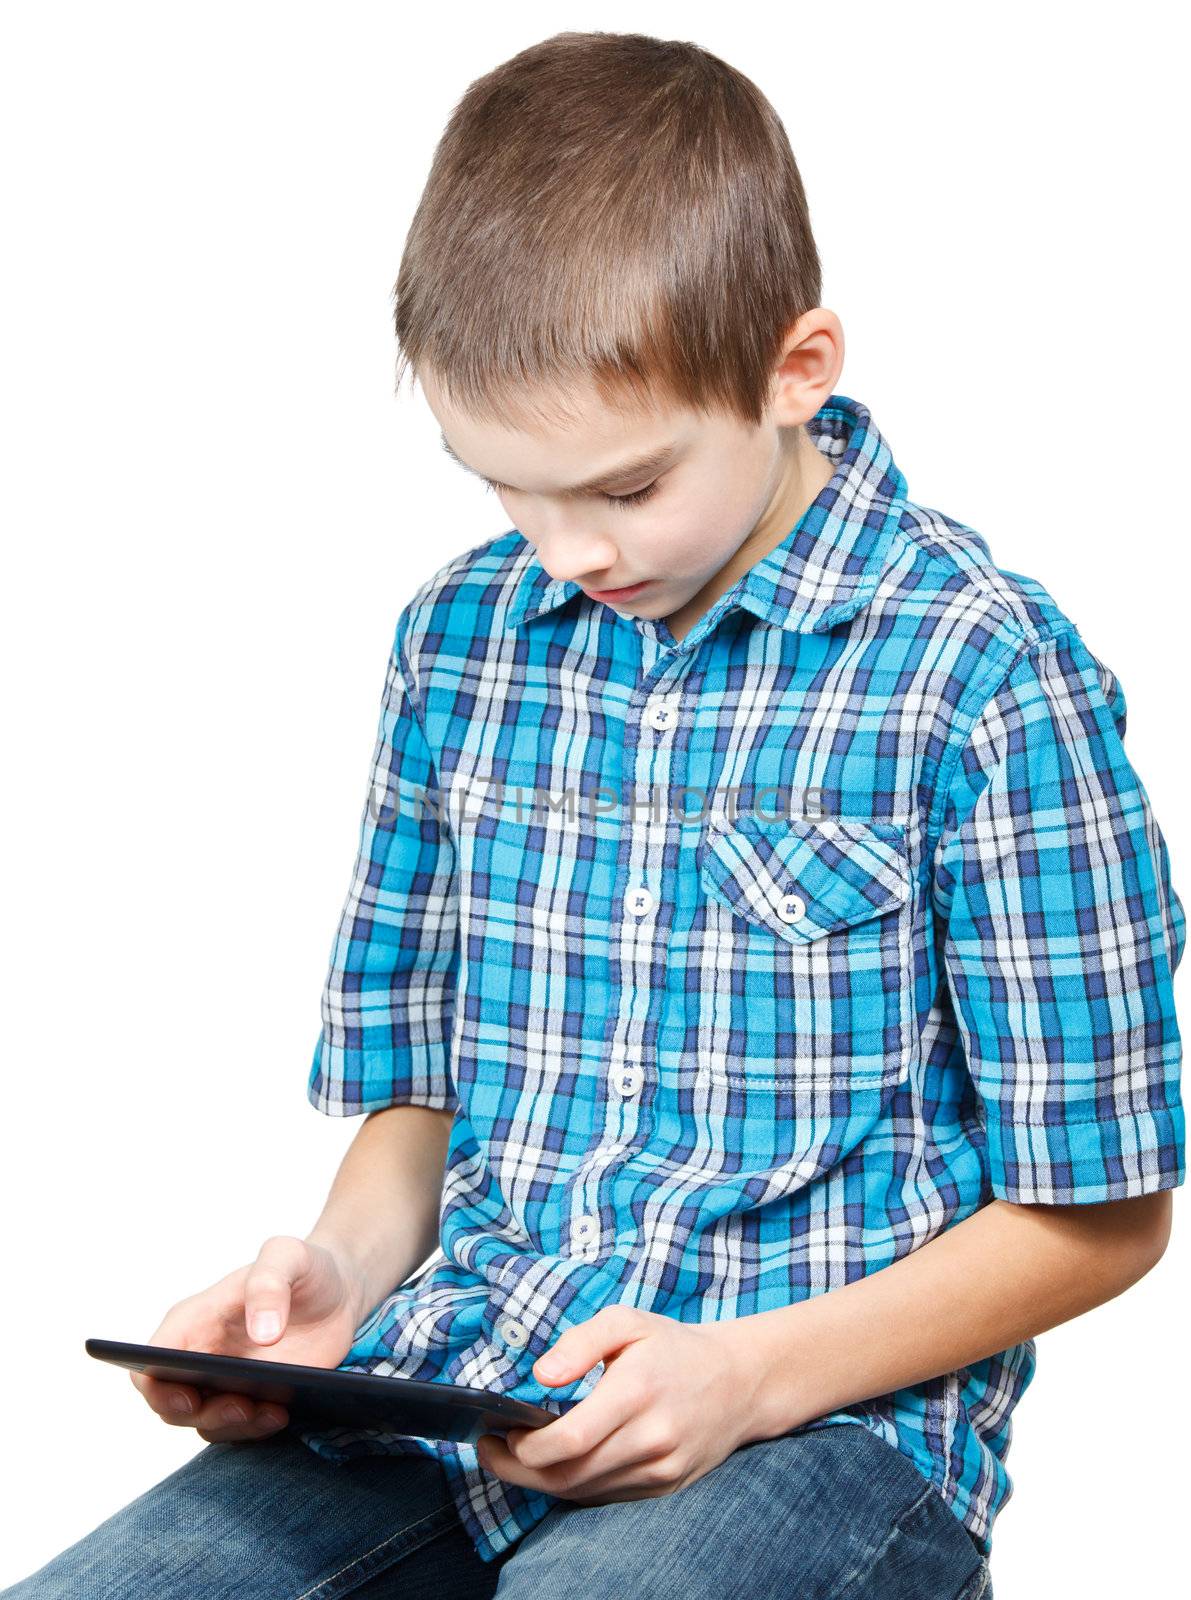 Kid playing with a tablet computer by naumoid